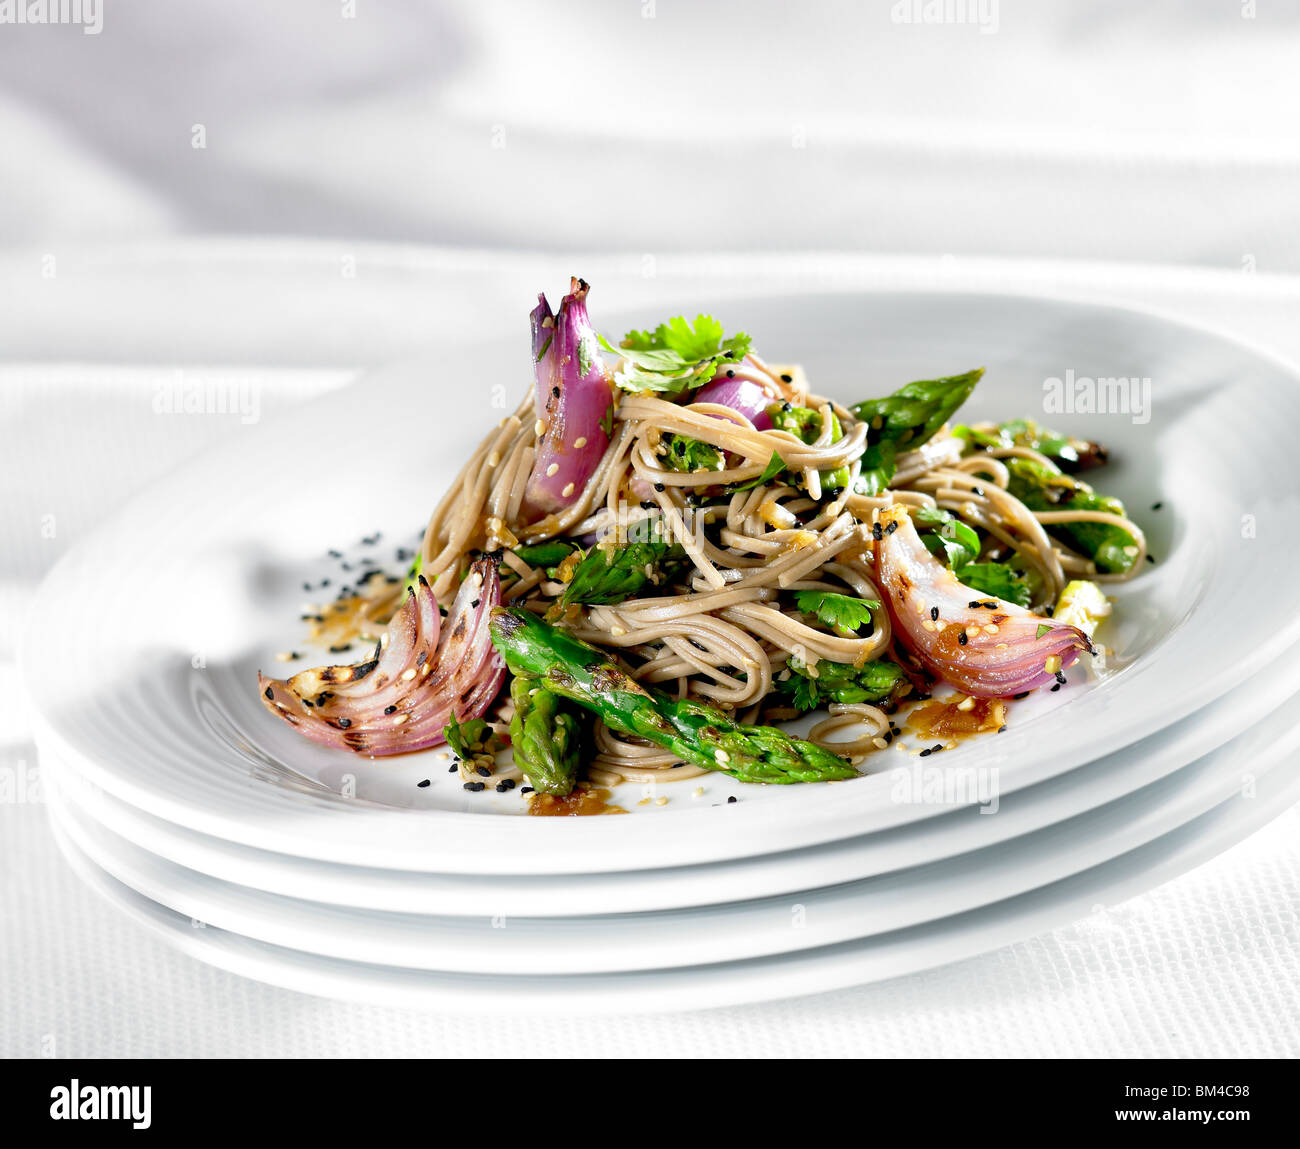 Asparagus and red onions with noodles Stock Photo